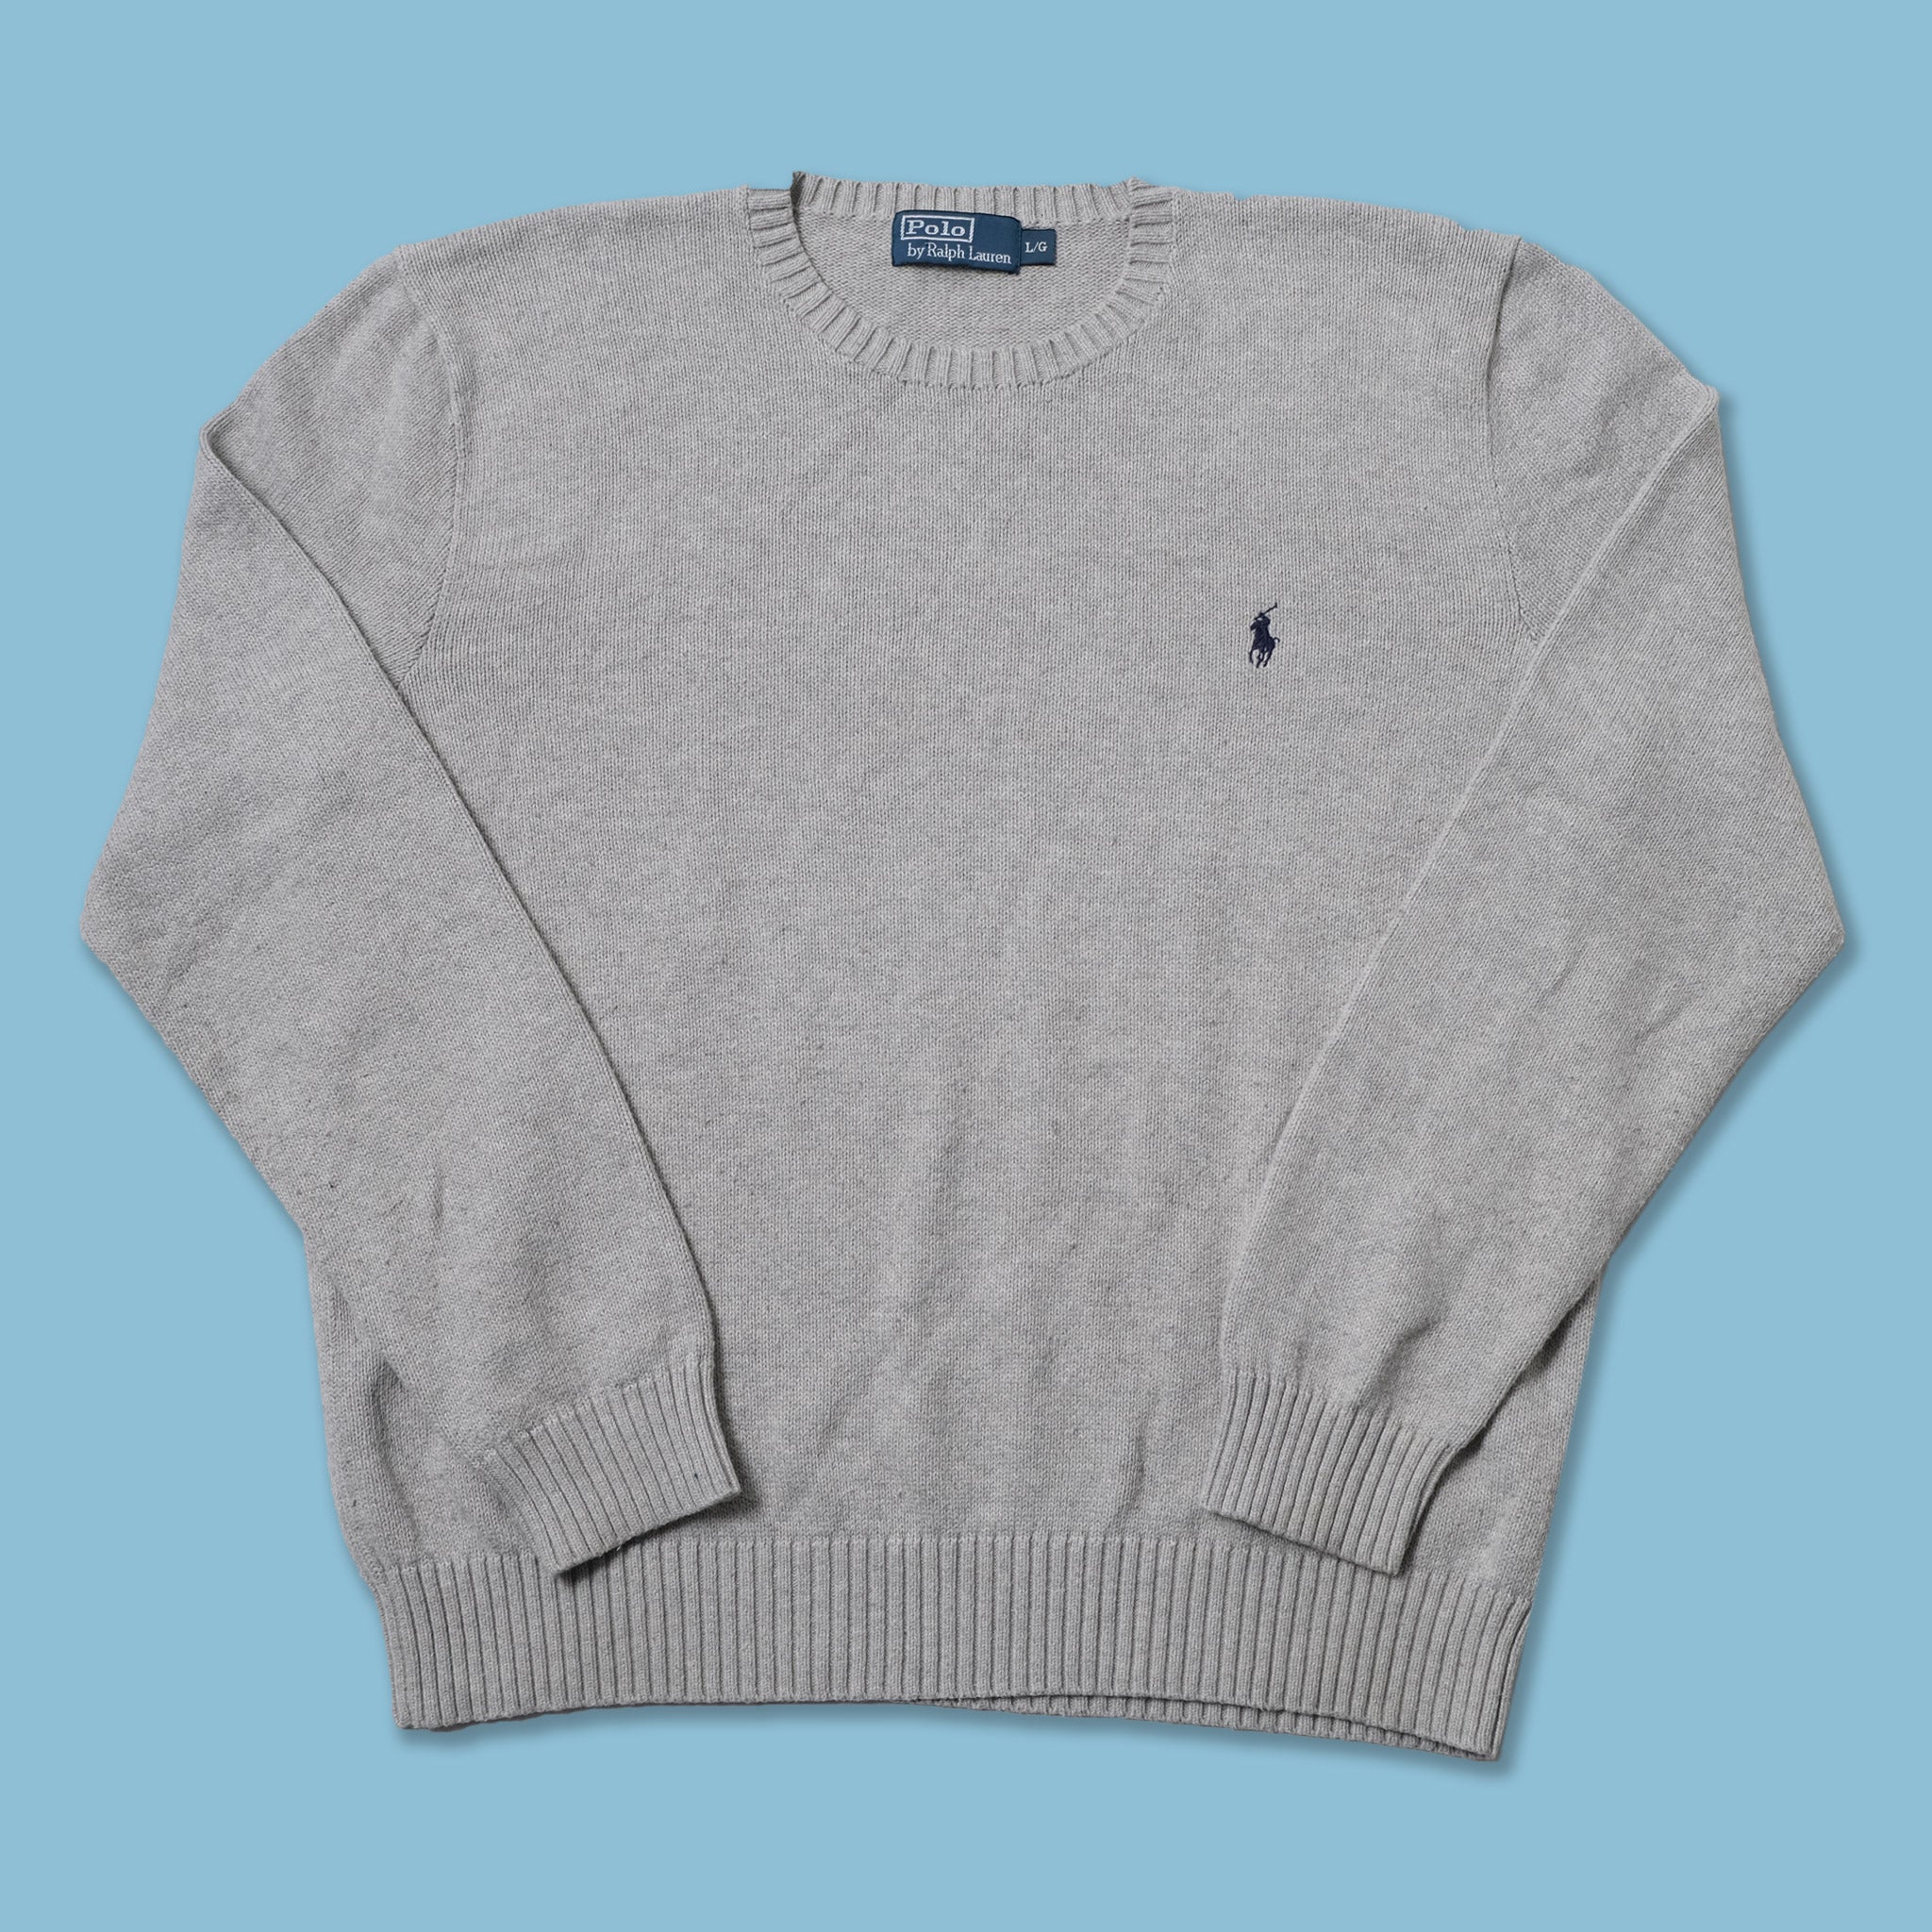 vintage polo sweater